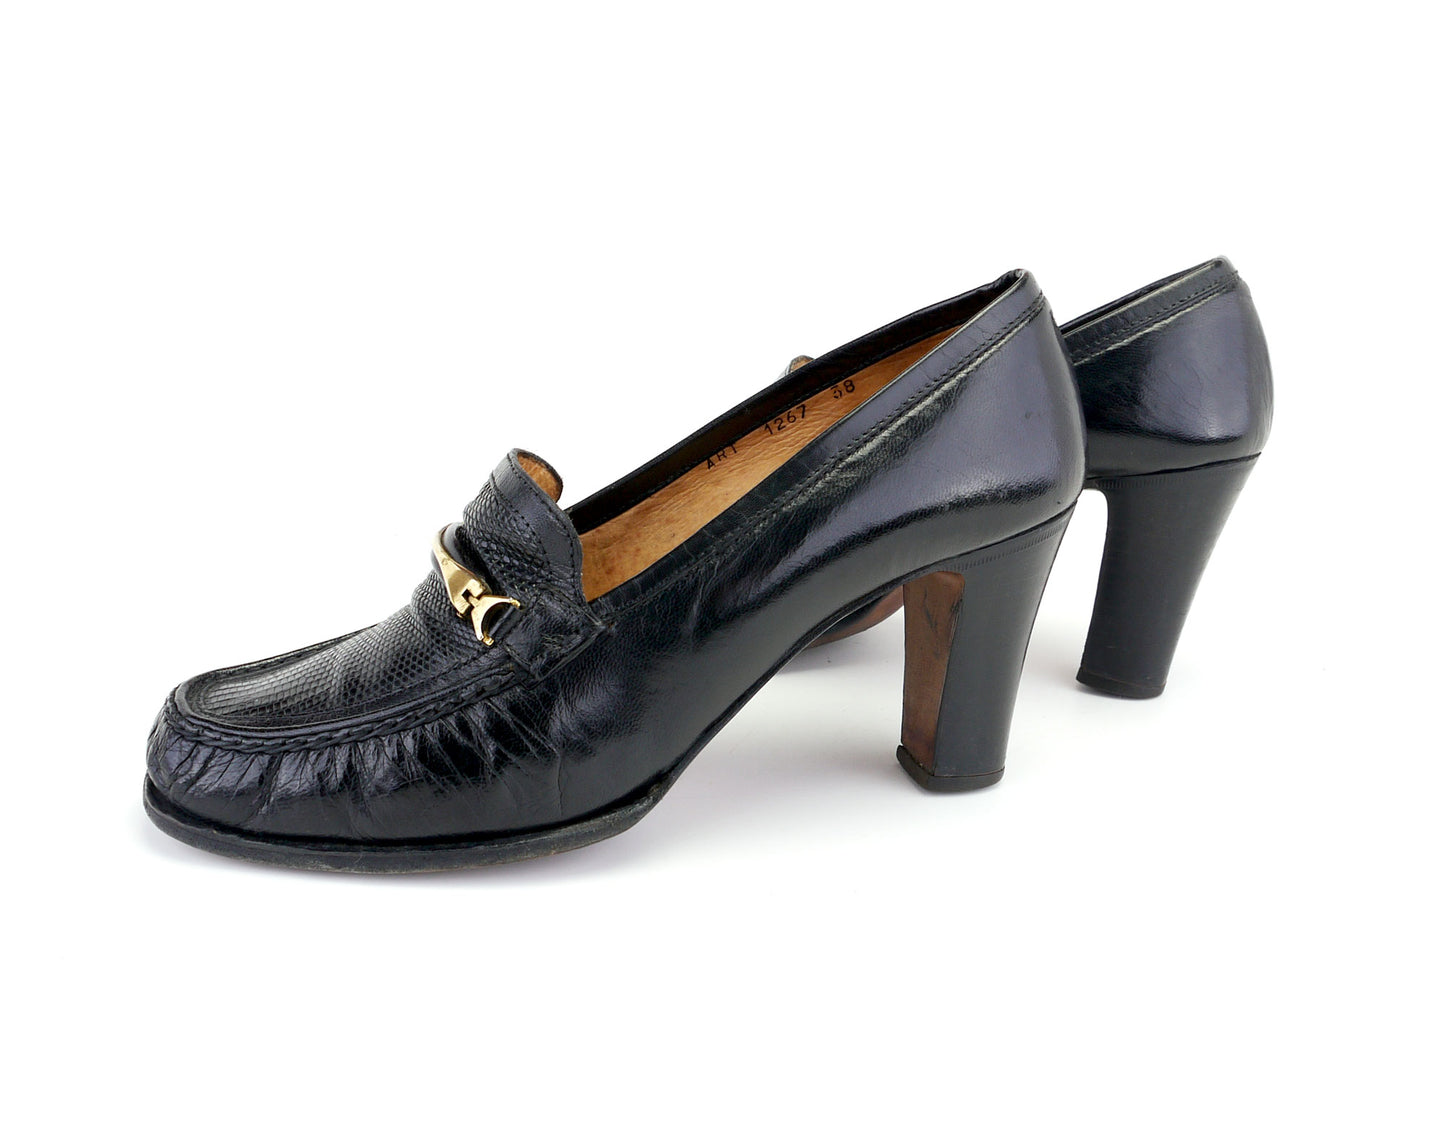 Urbane Black 1970s Loafers by Bally UK 5